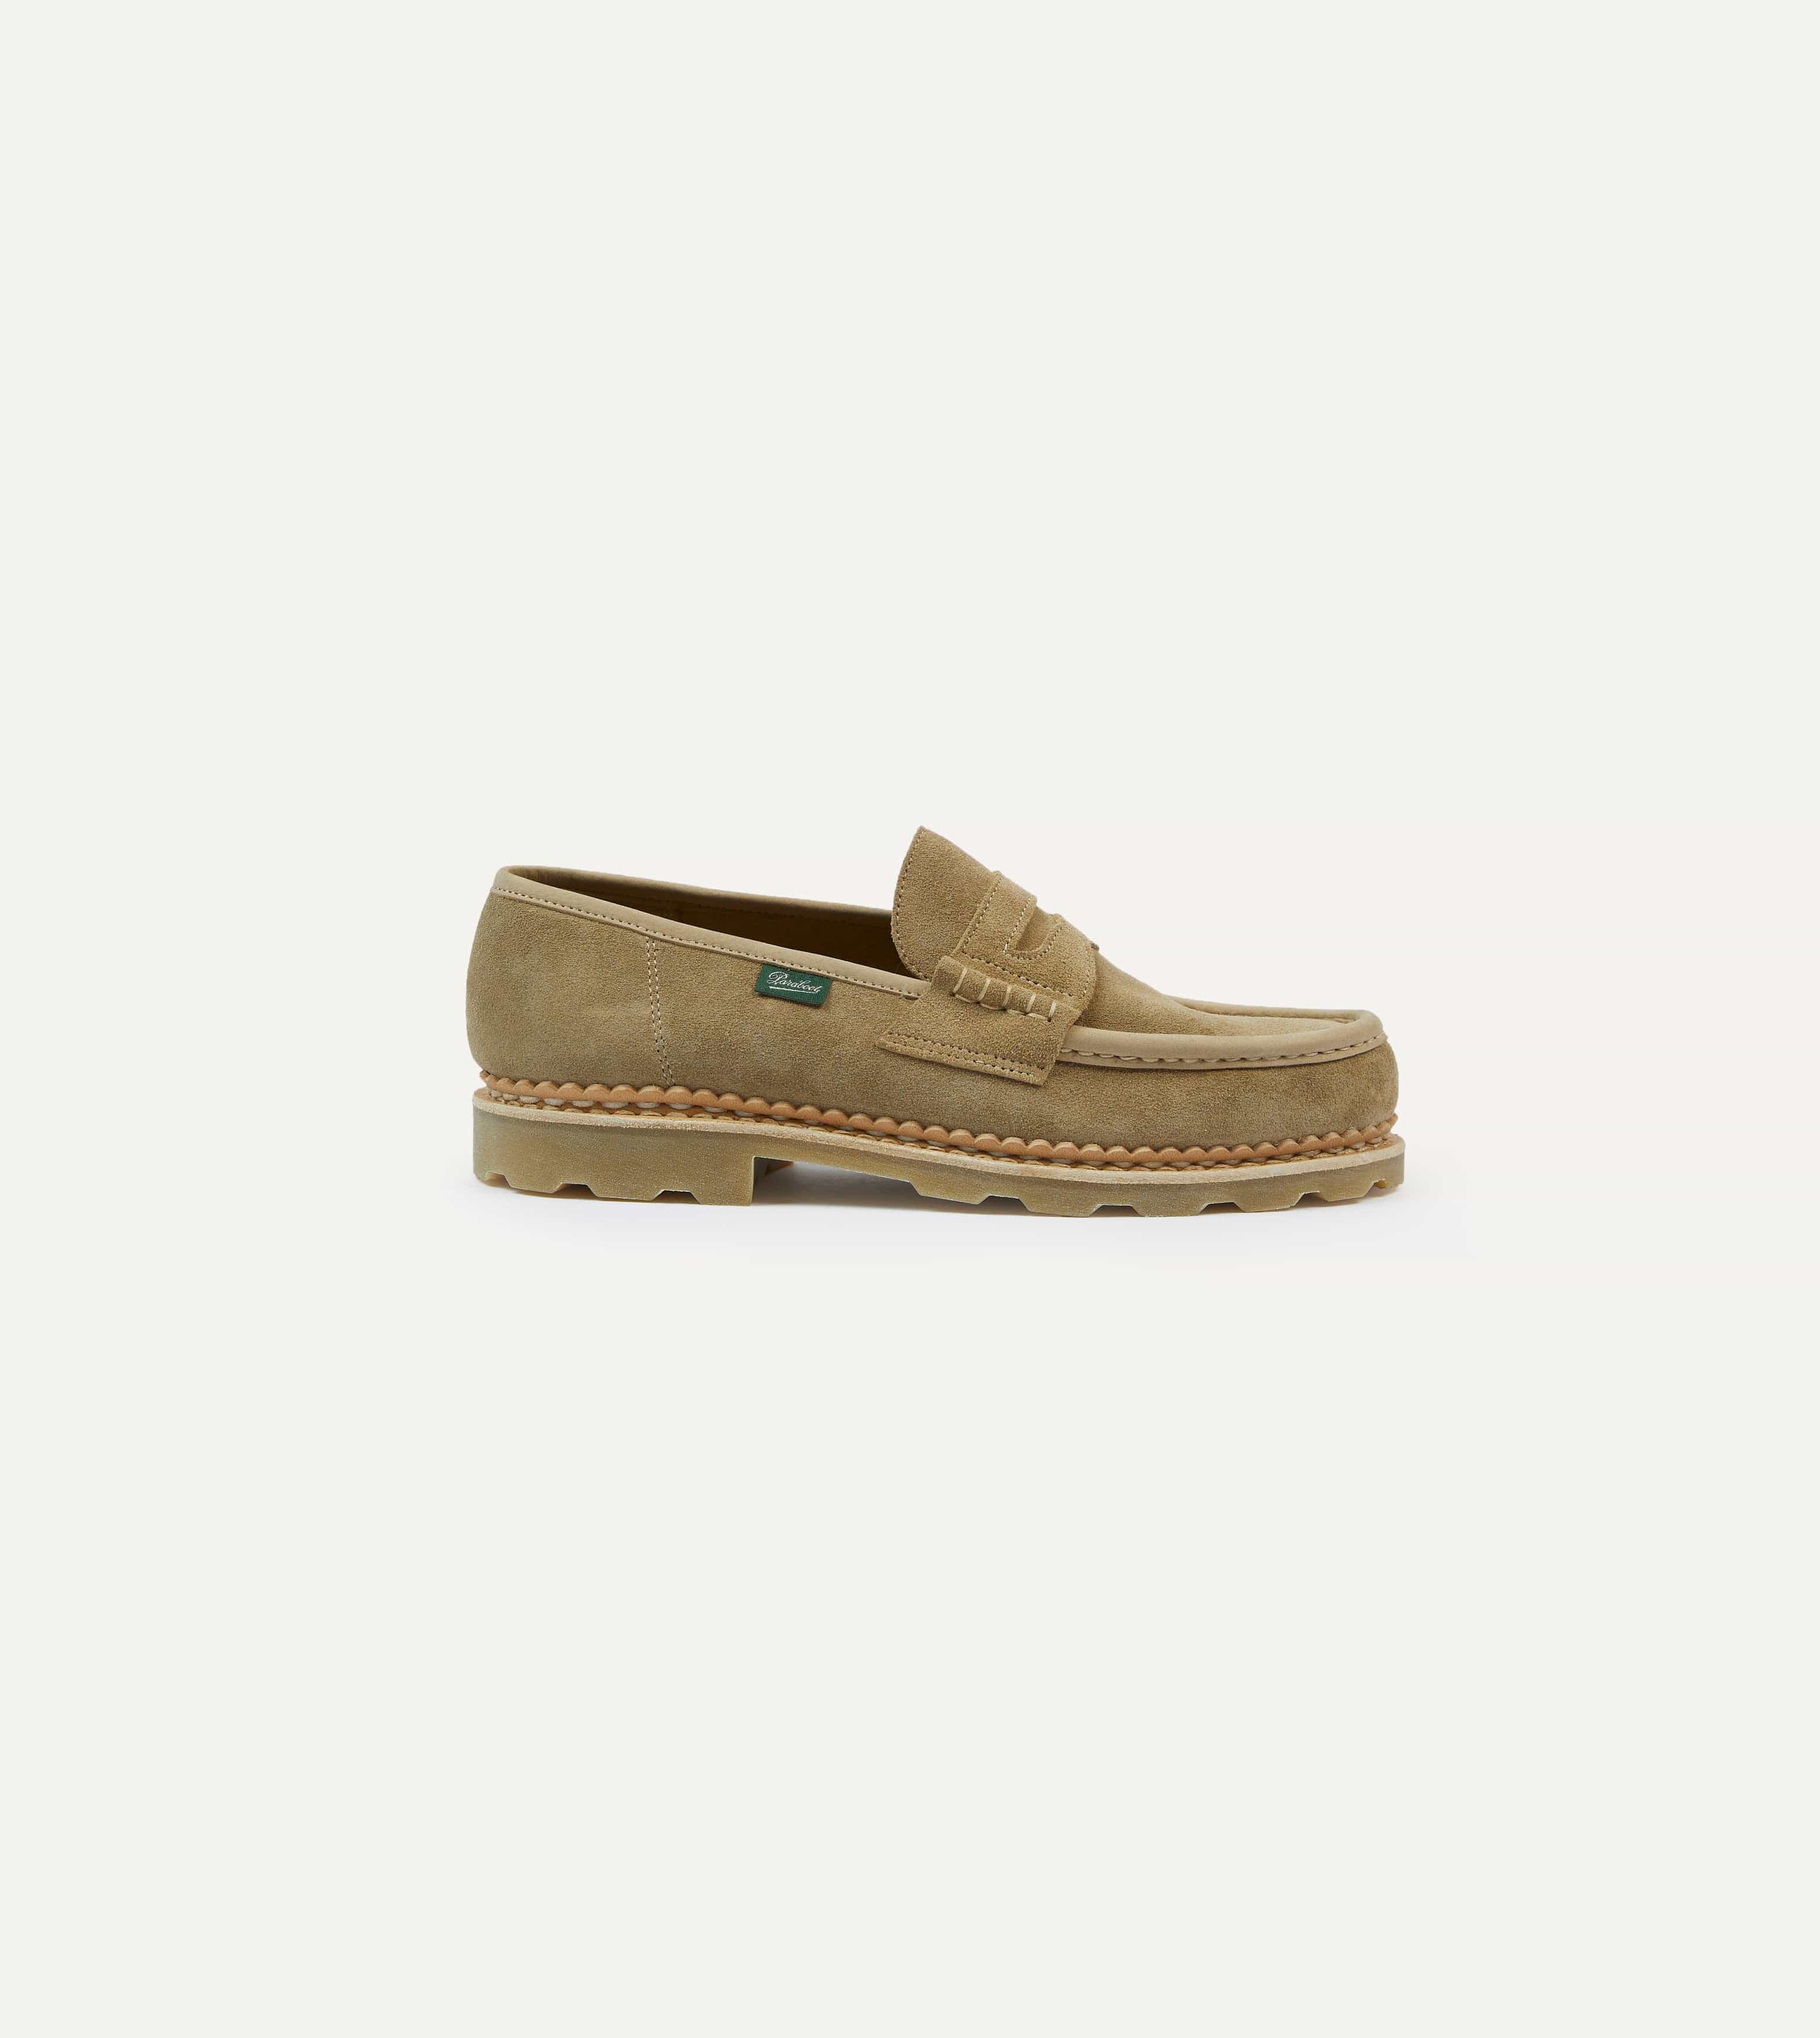 Paraboot Nantes Sand Suede Loafer – Drakes